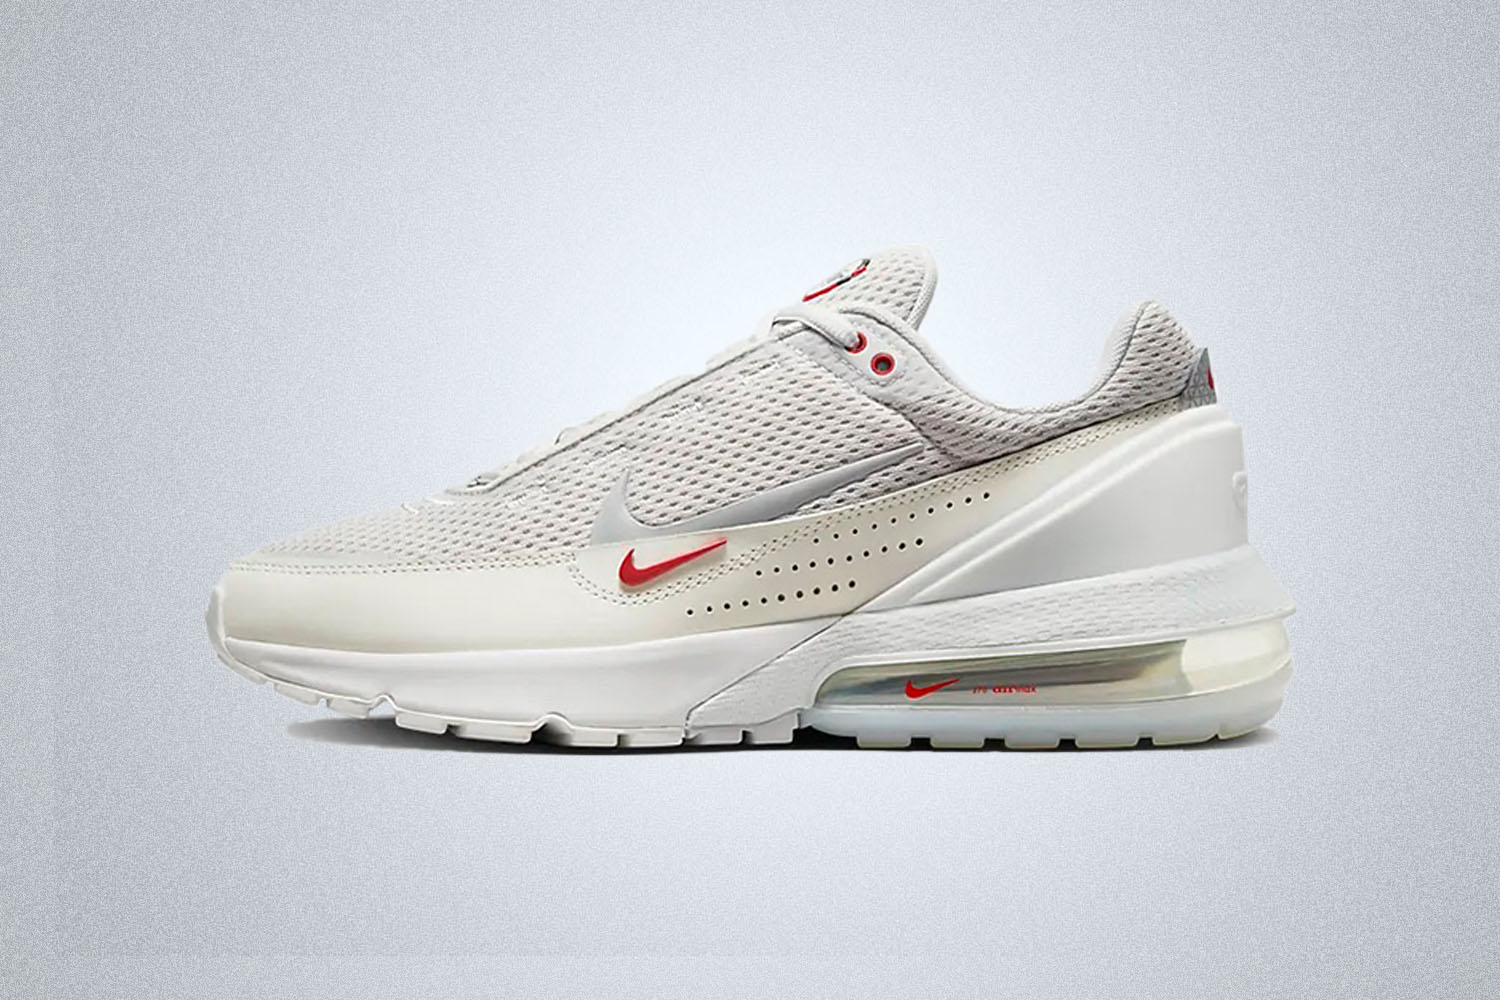 Which Nike Air Max Sneaker Model Is The Most Comfortable? - InsideHook